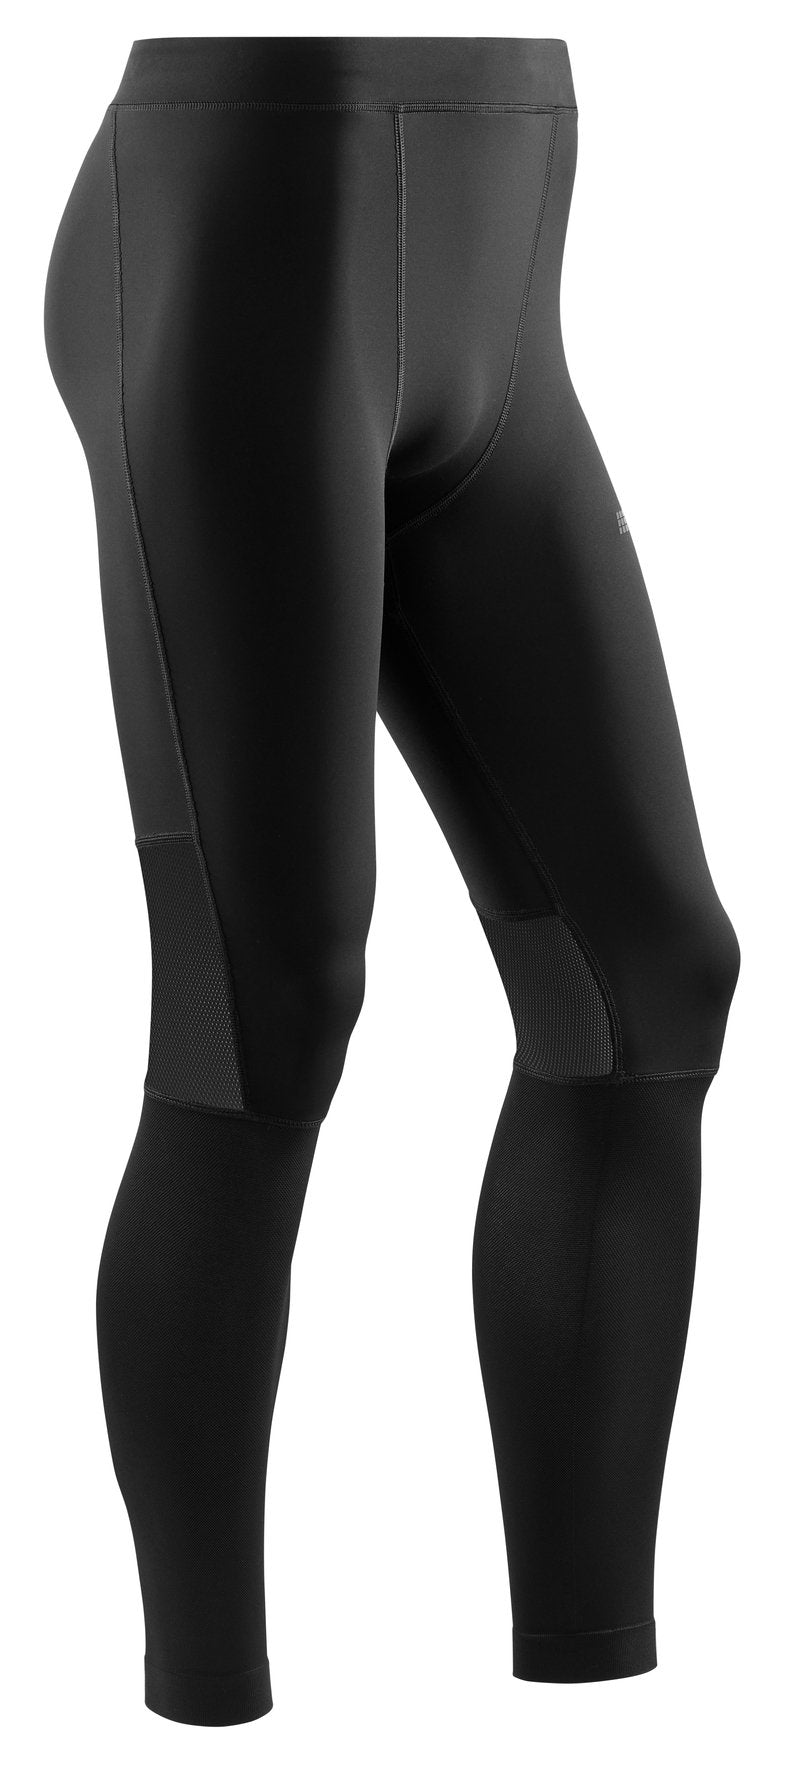 Compression Run Tights 4.0 for Men, Running, Gym